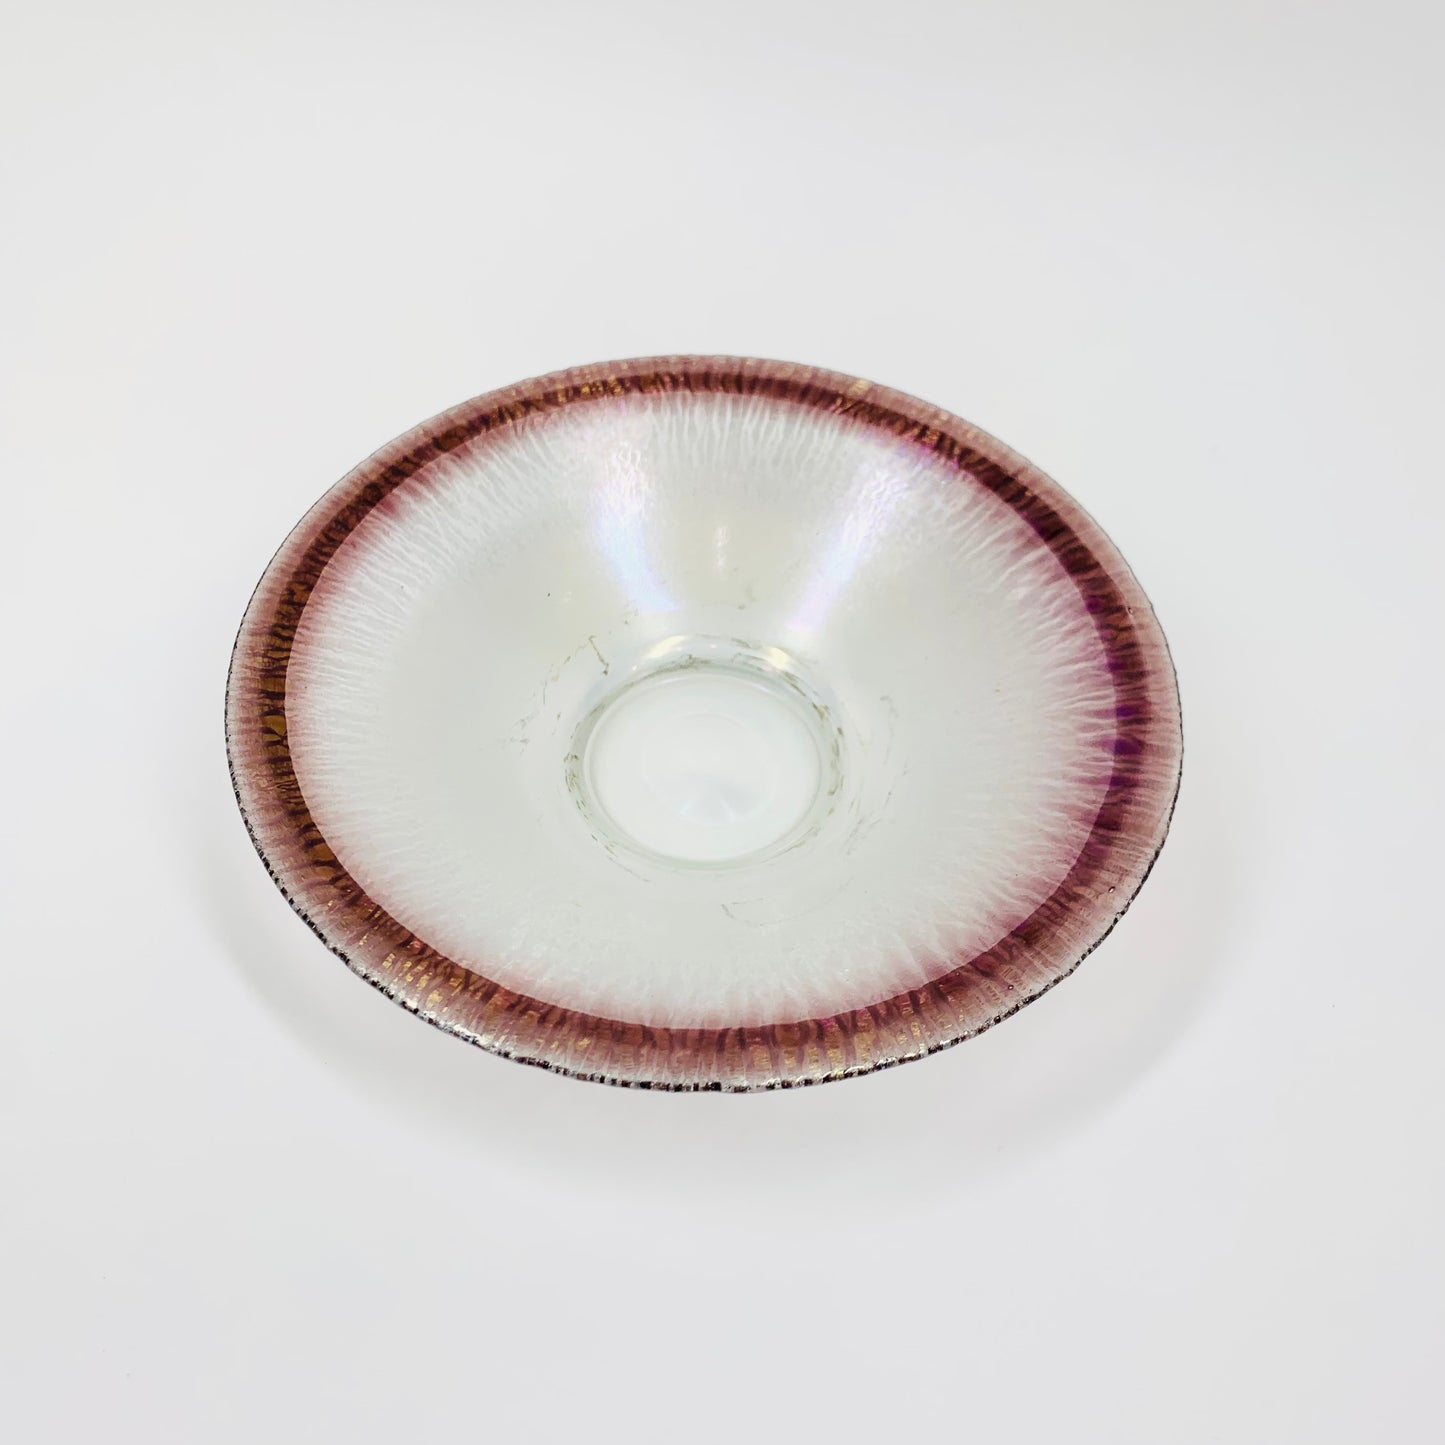 Midcentury iridescent small glass bowl with red speckled rim